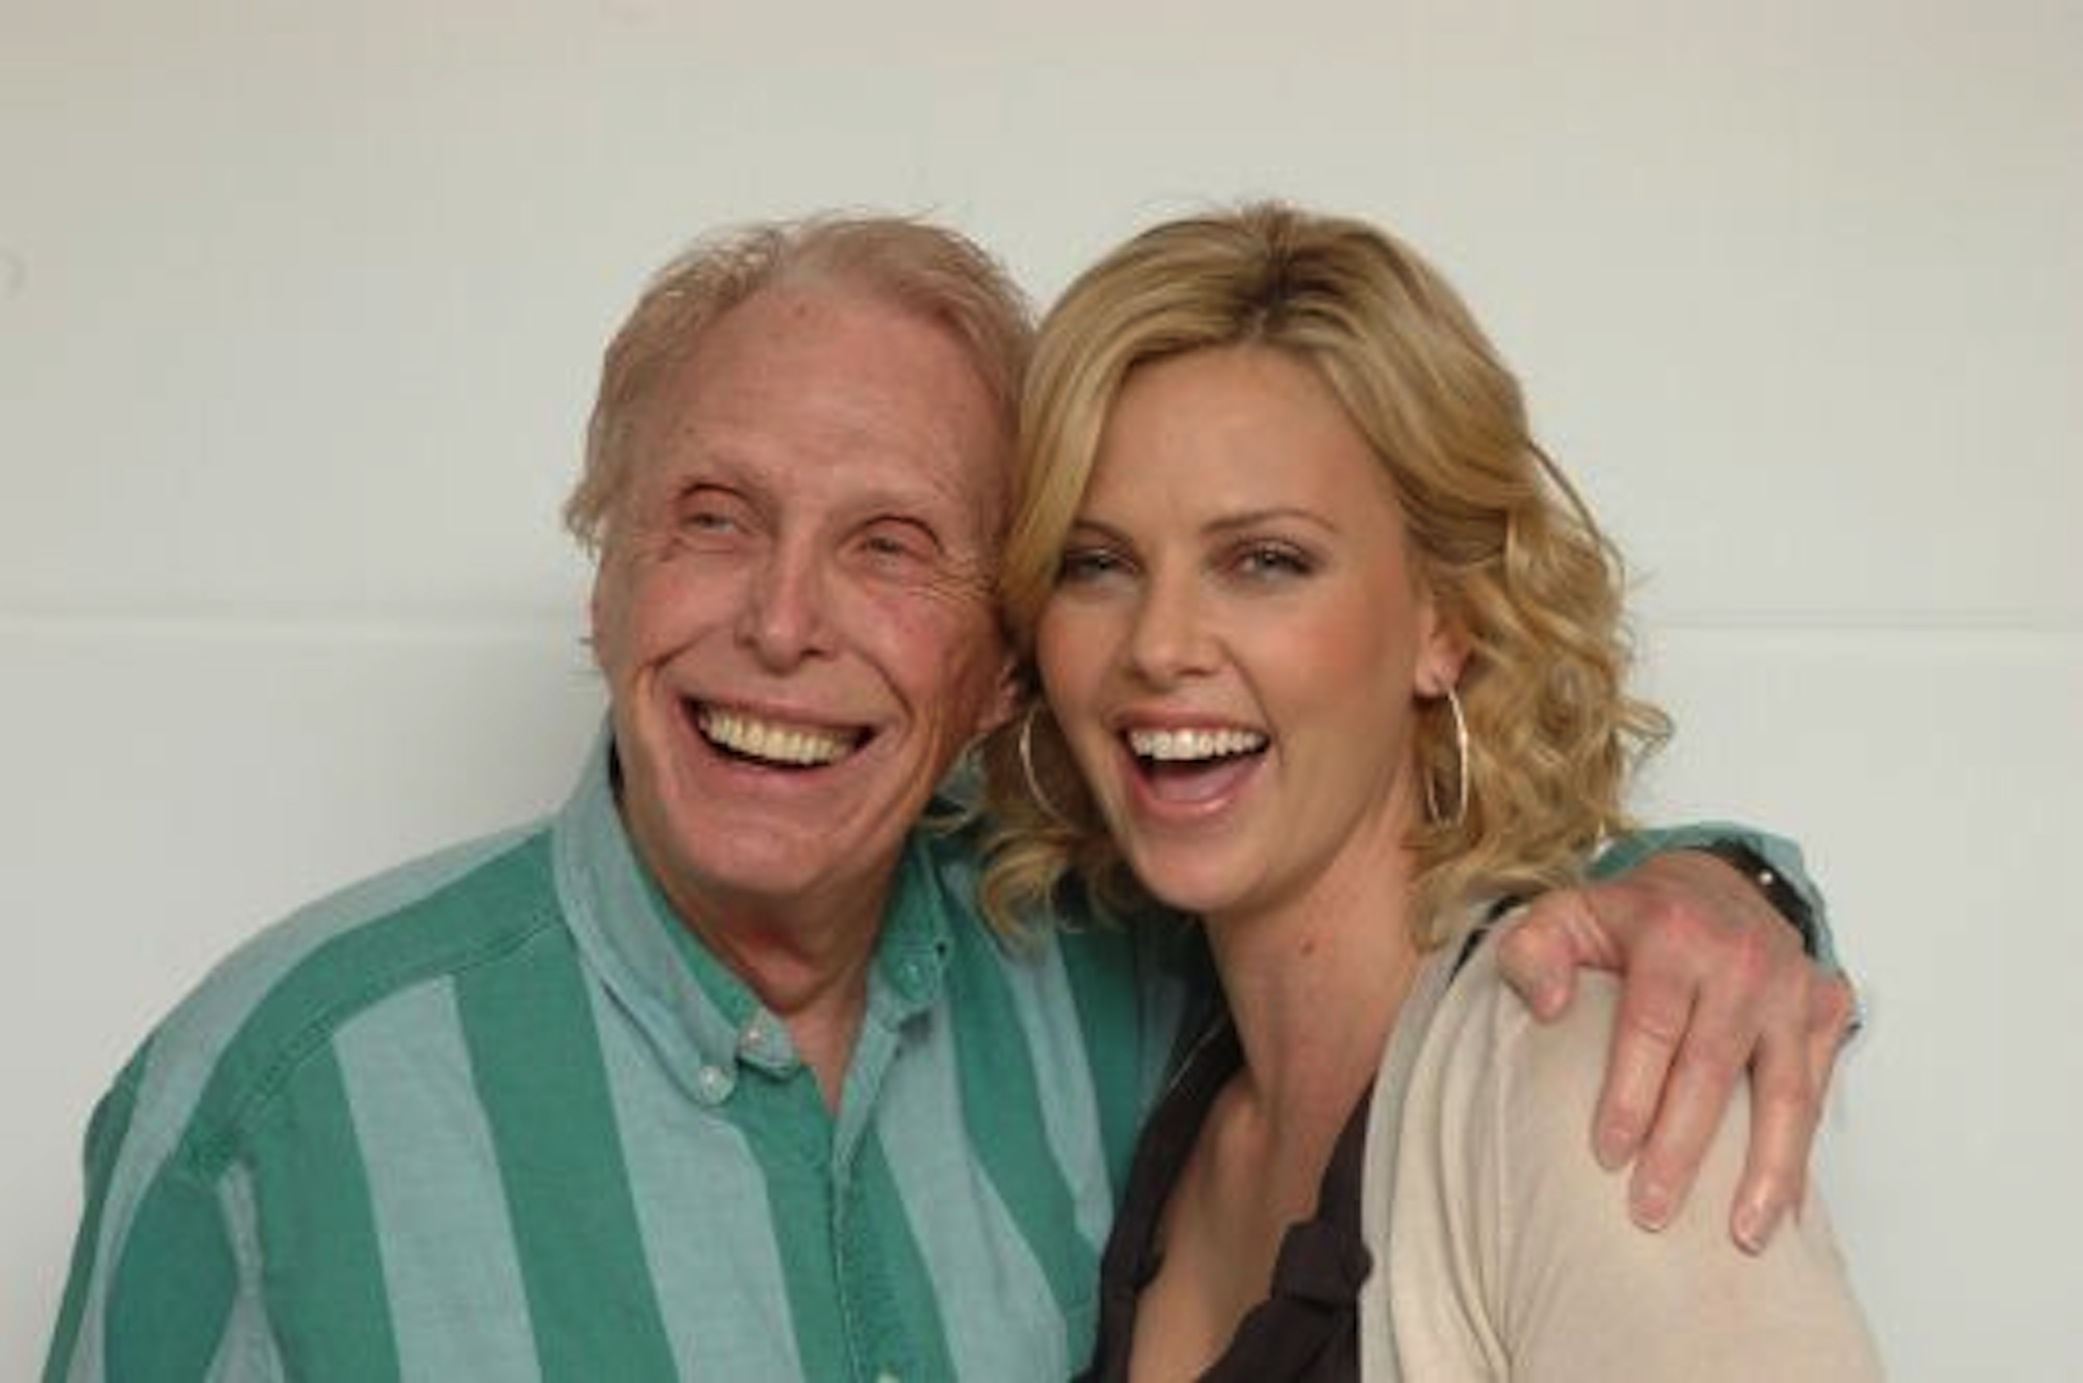 With Charlize Theron